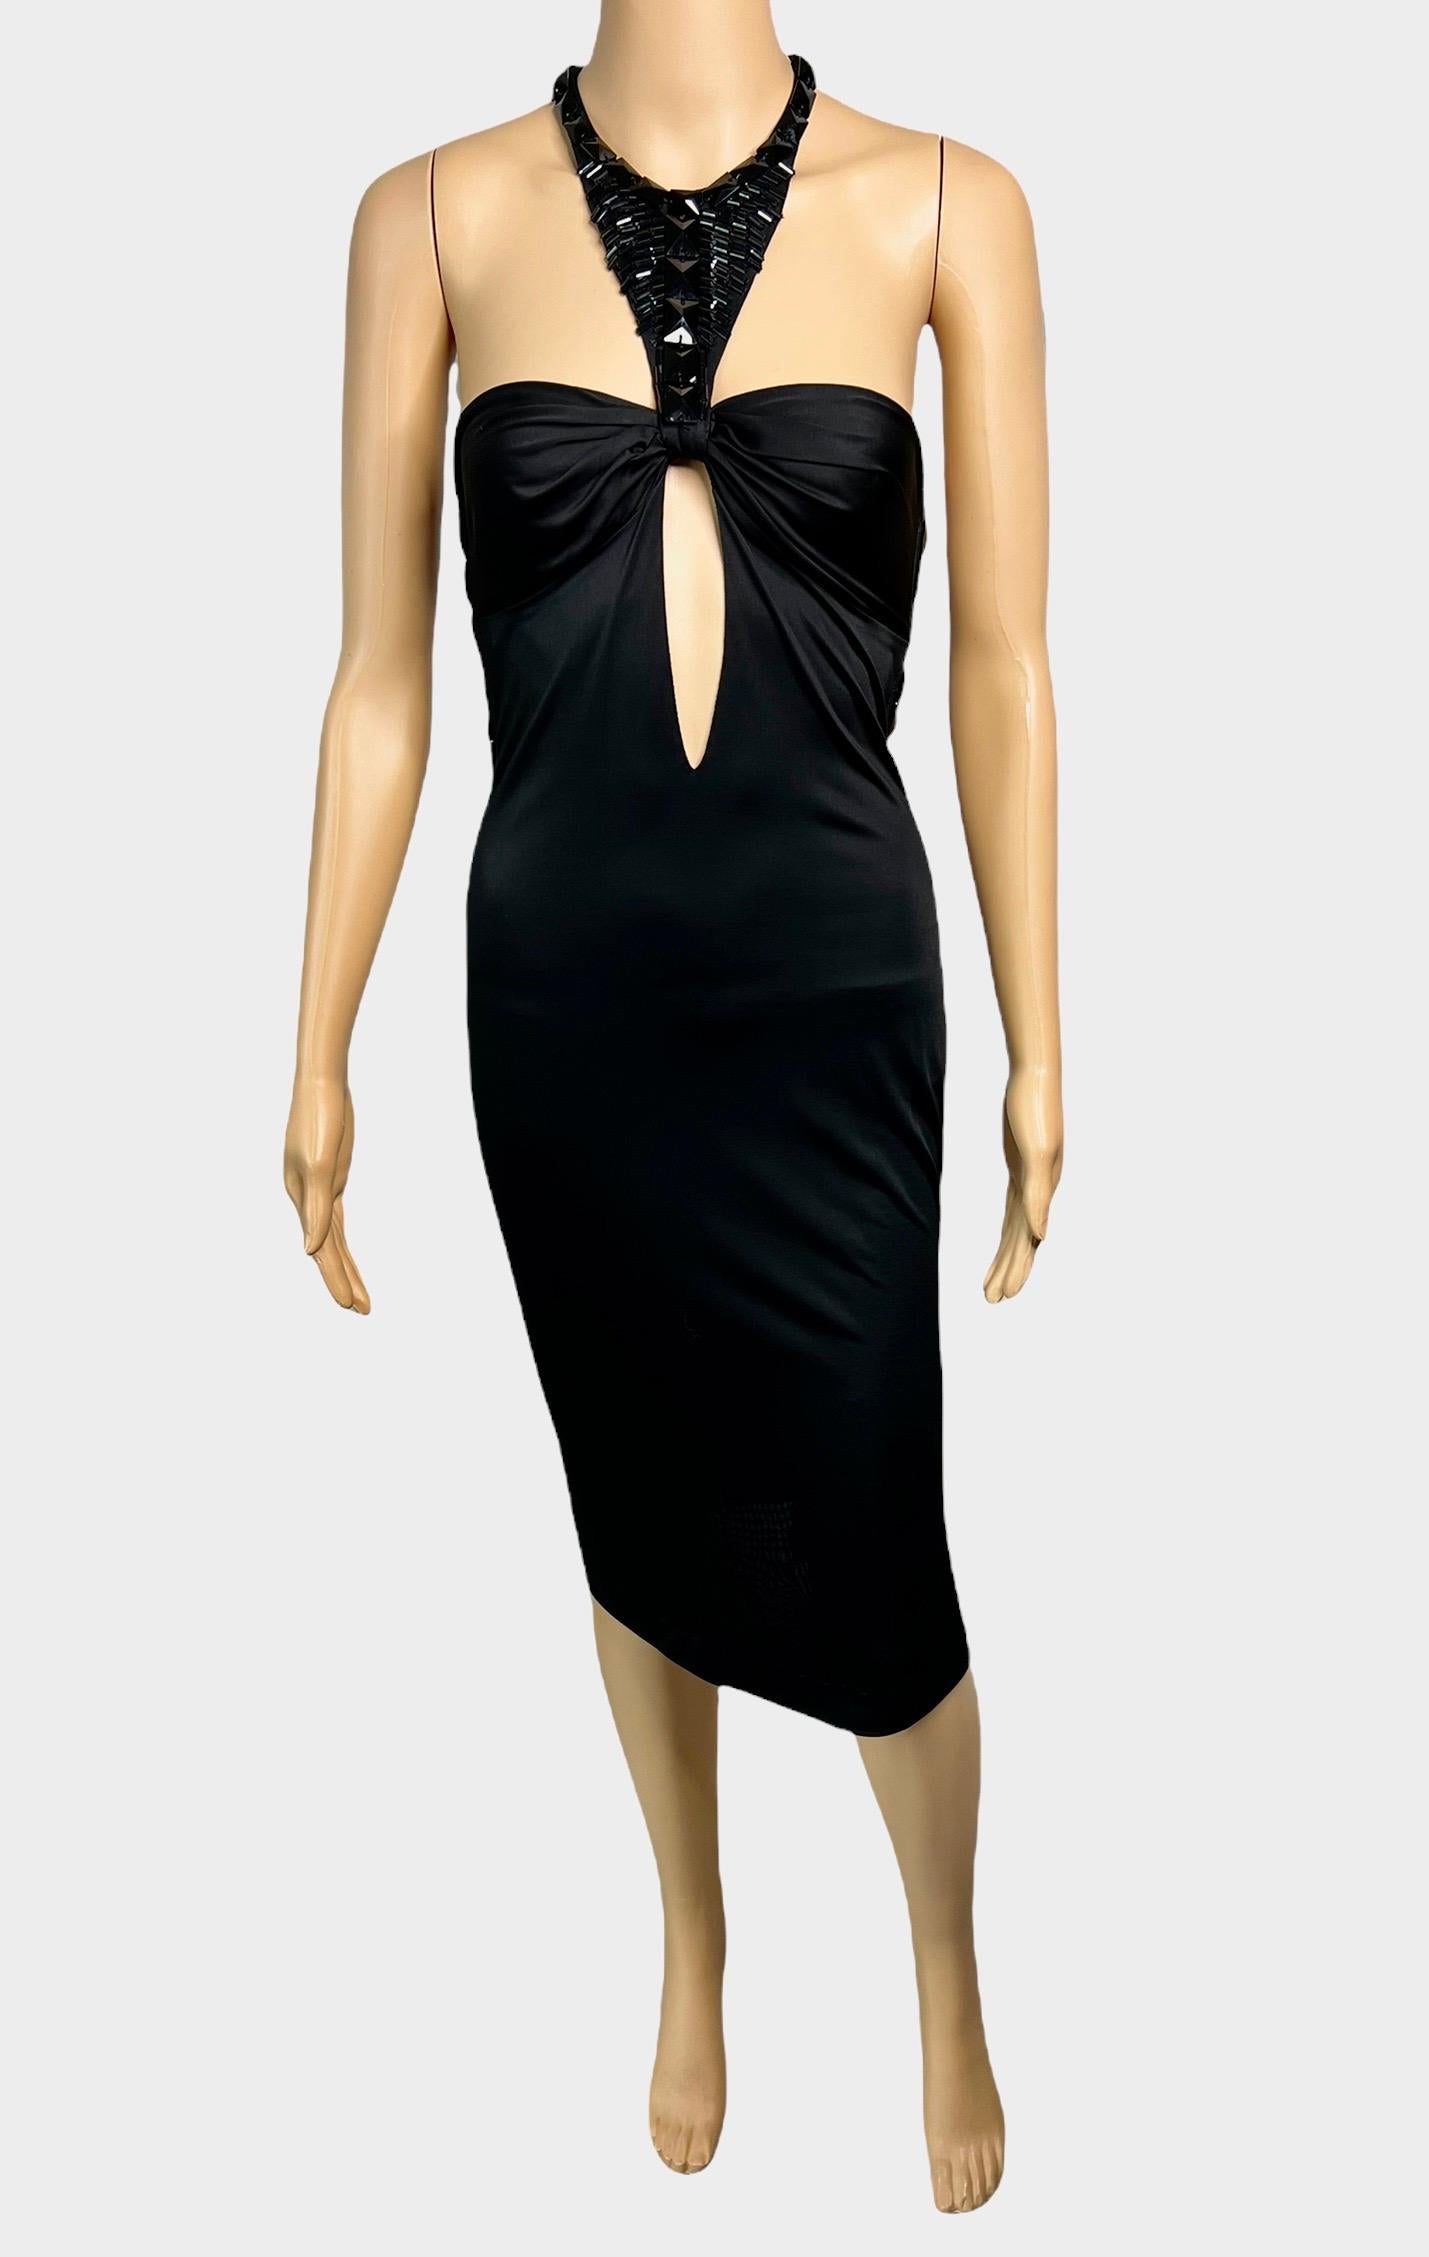 Tom Ford for Gucci F/W 2004 Embellished Plunging Cutout Black Evening Dress  For Sale 2